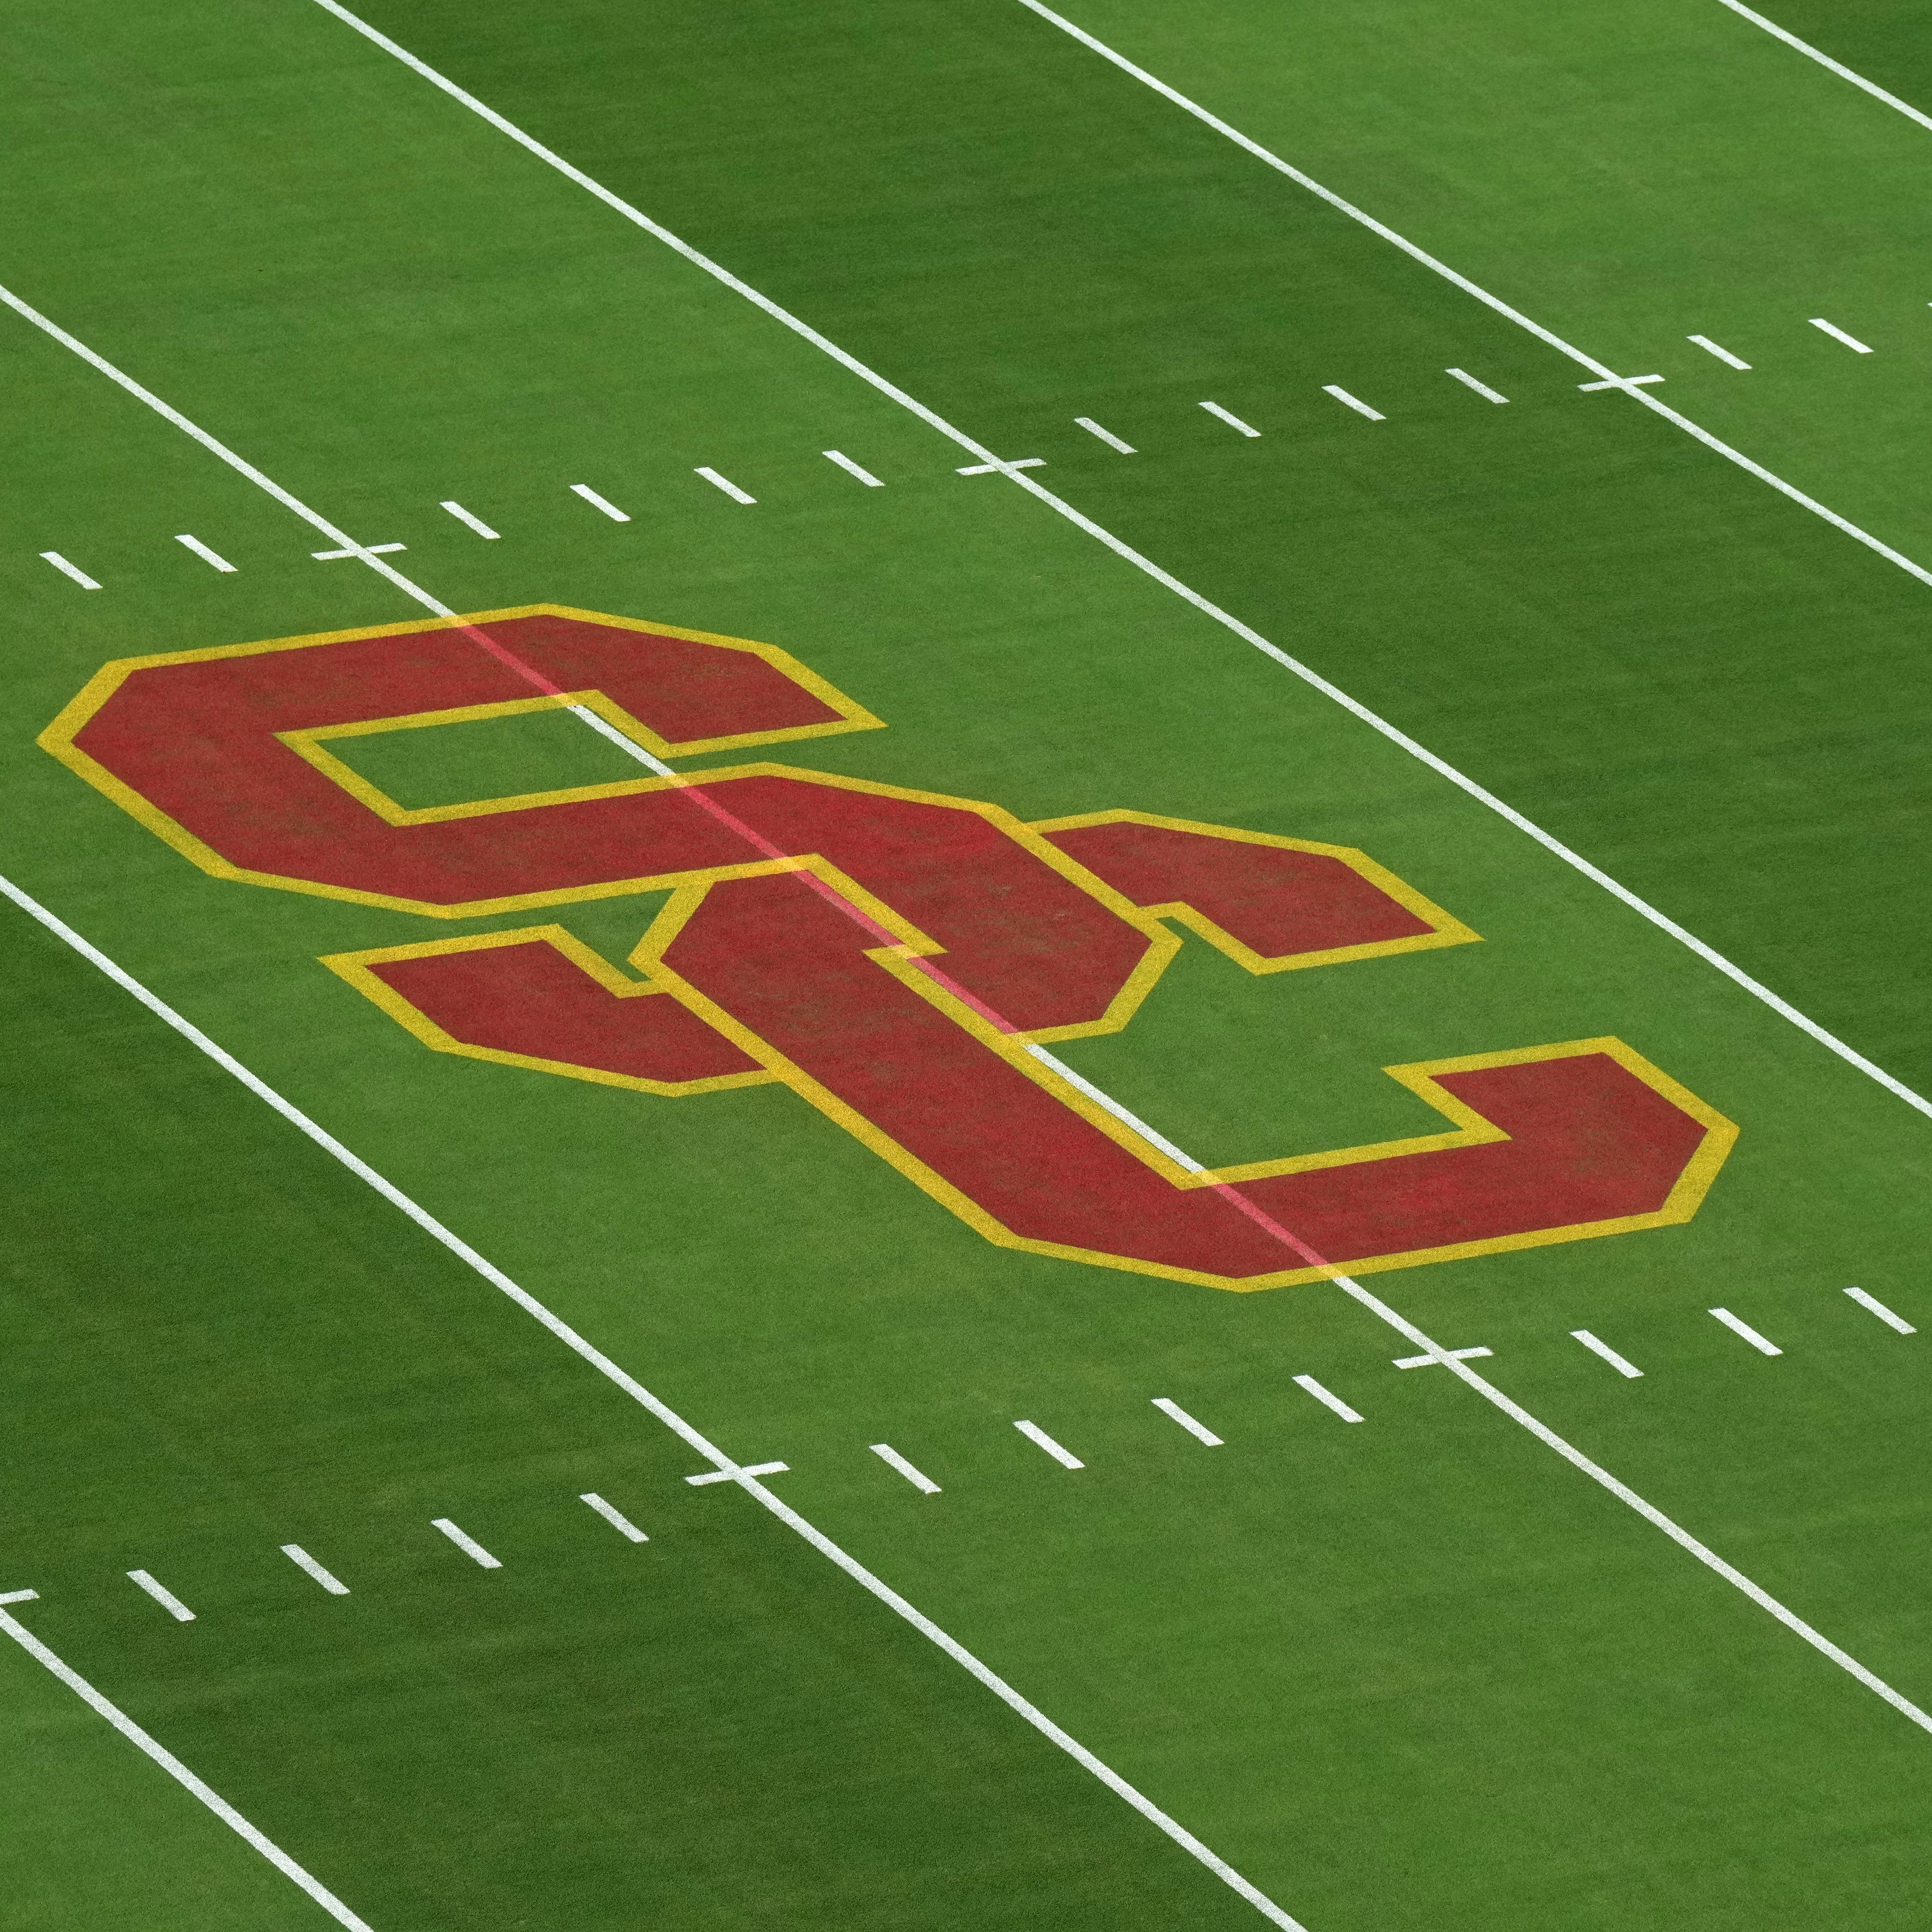 Sep 17, 2022; Los Angeles, California, USA; The SC Trojans logo at midfield at United Airlines Field at Los Angeles Memorial Coliseum before a game between the Fresno State Bulldogs and the Southern California Trojans. Mandatory Credit: Kirby Lee-USA TODAY Sports